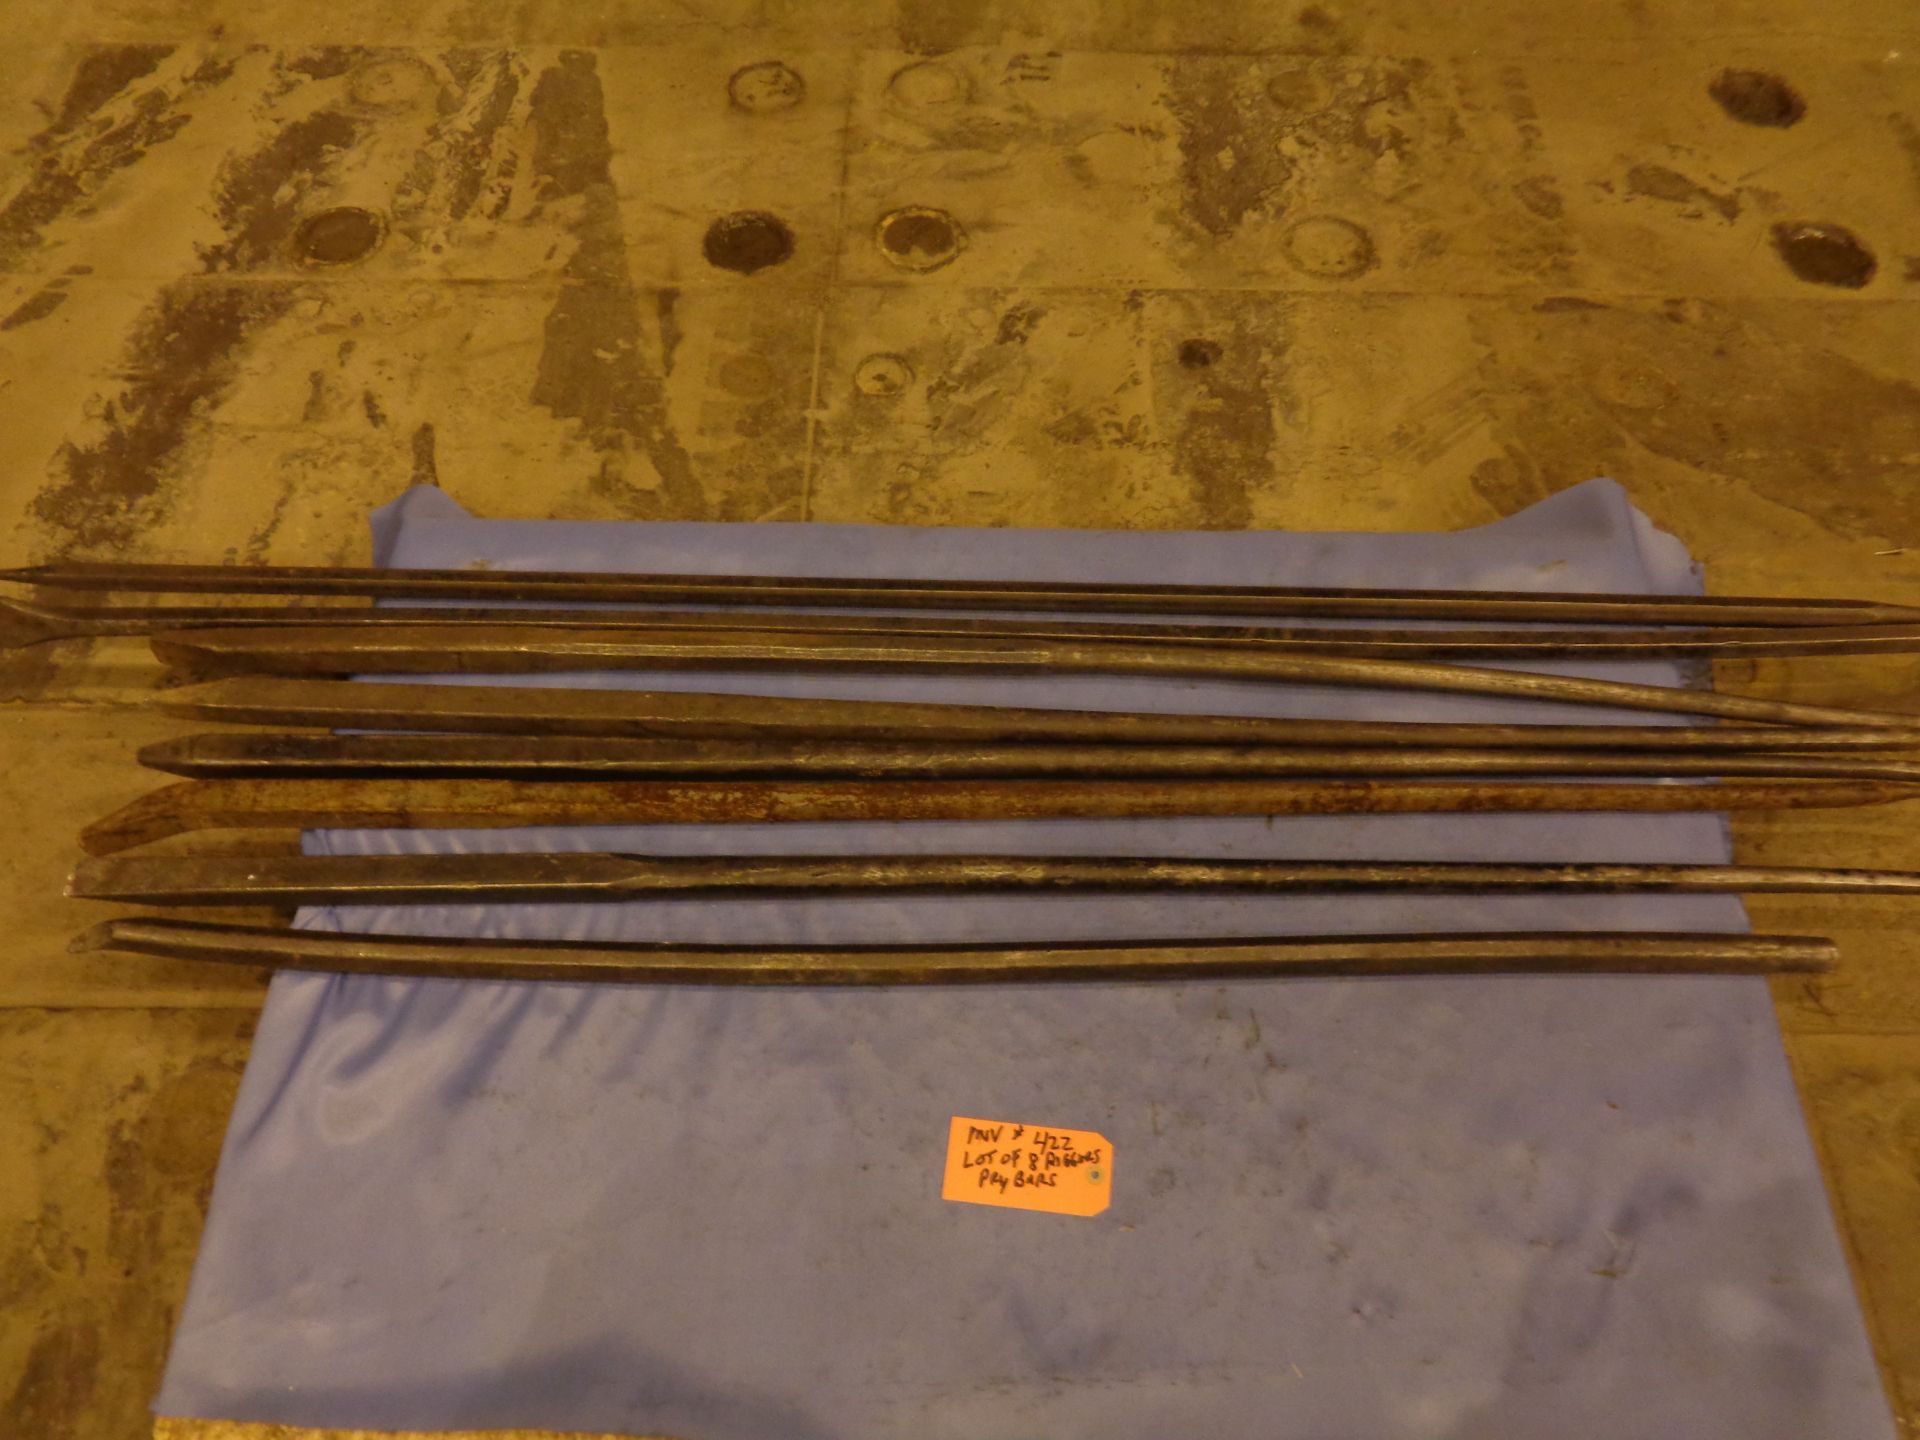 Lot of 8 Riggers Pry Bars (422)